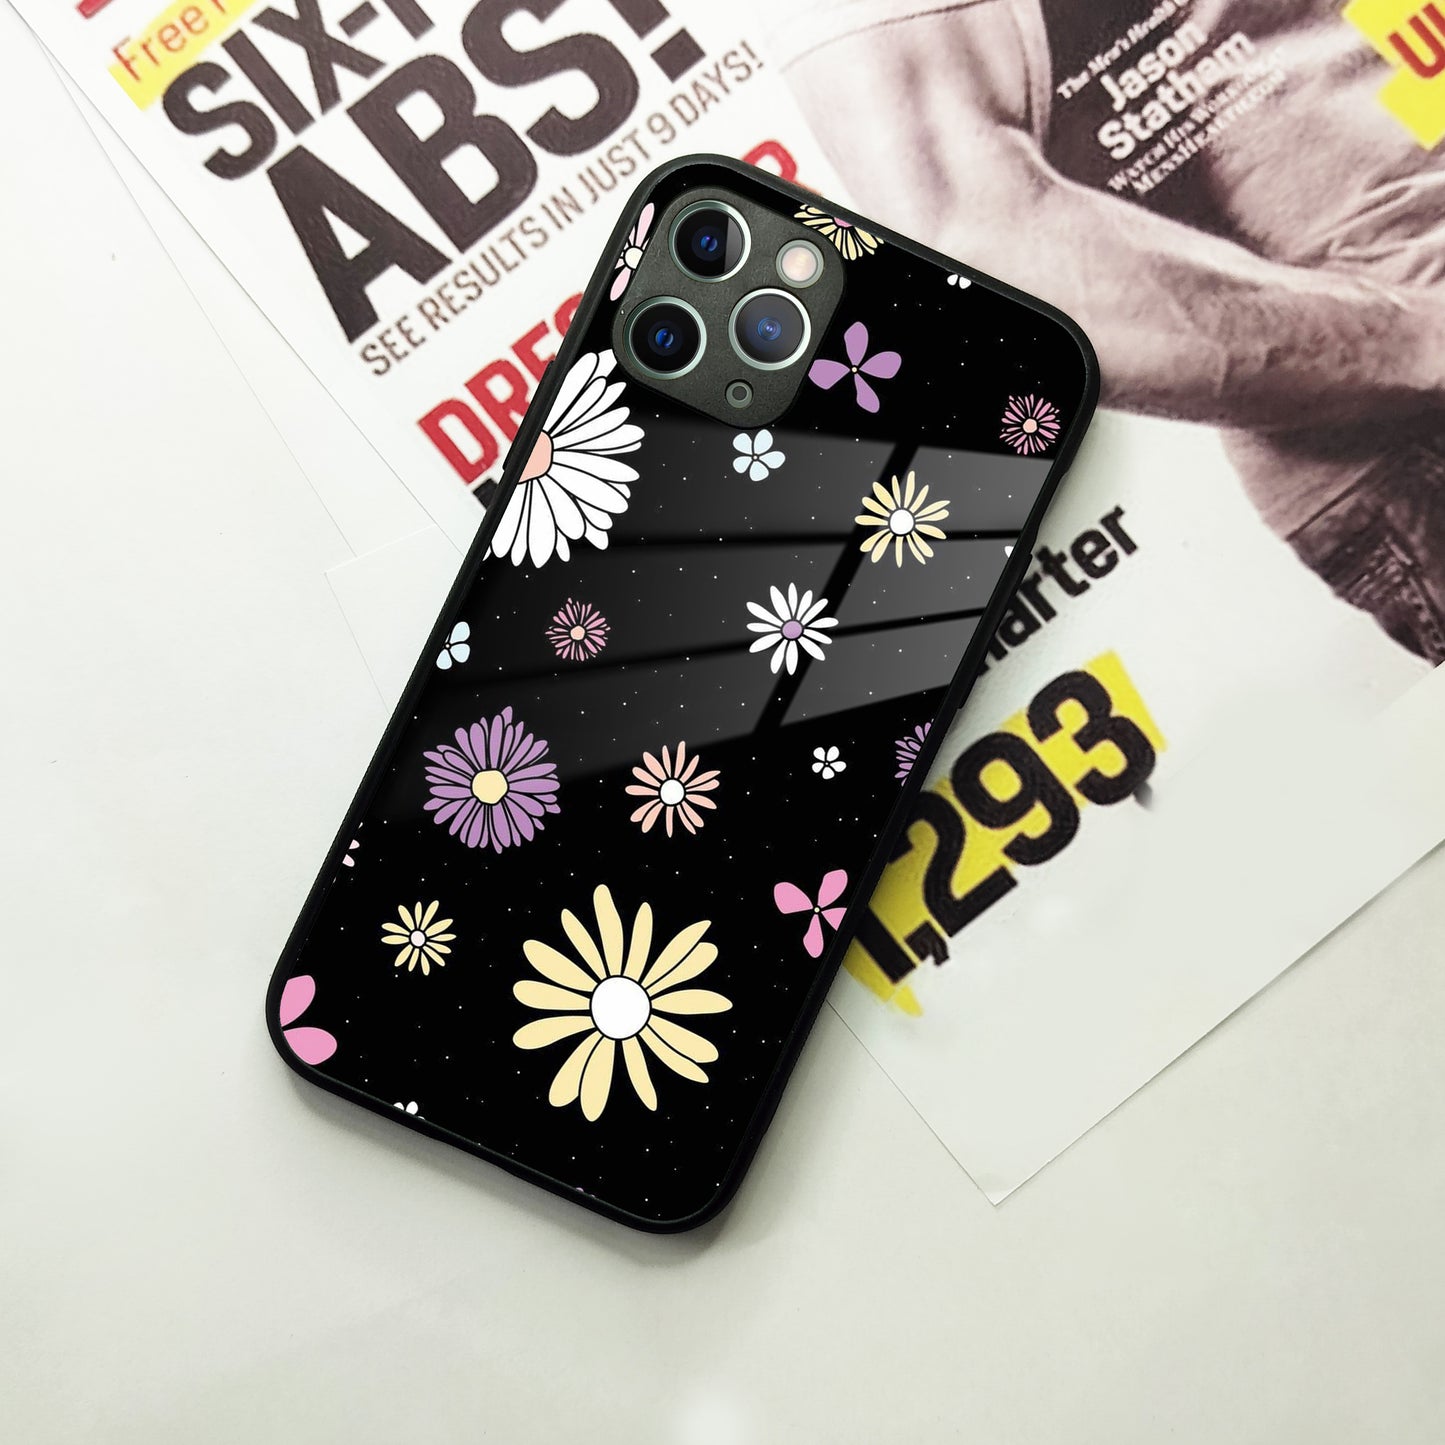 Seamless Floral Print Glass Case Cover For iPhone